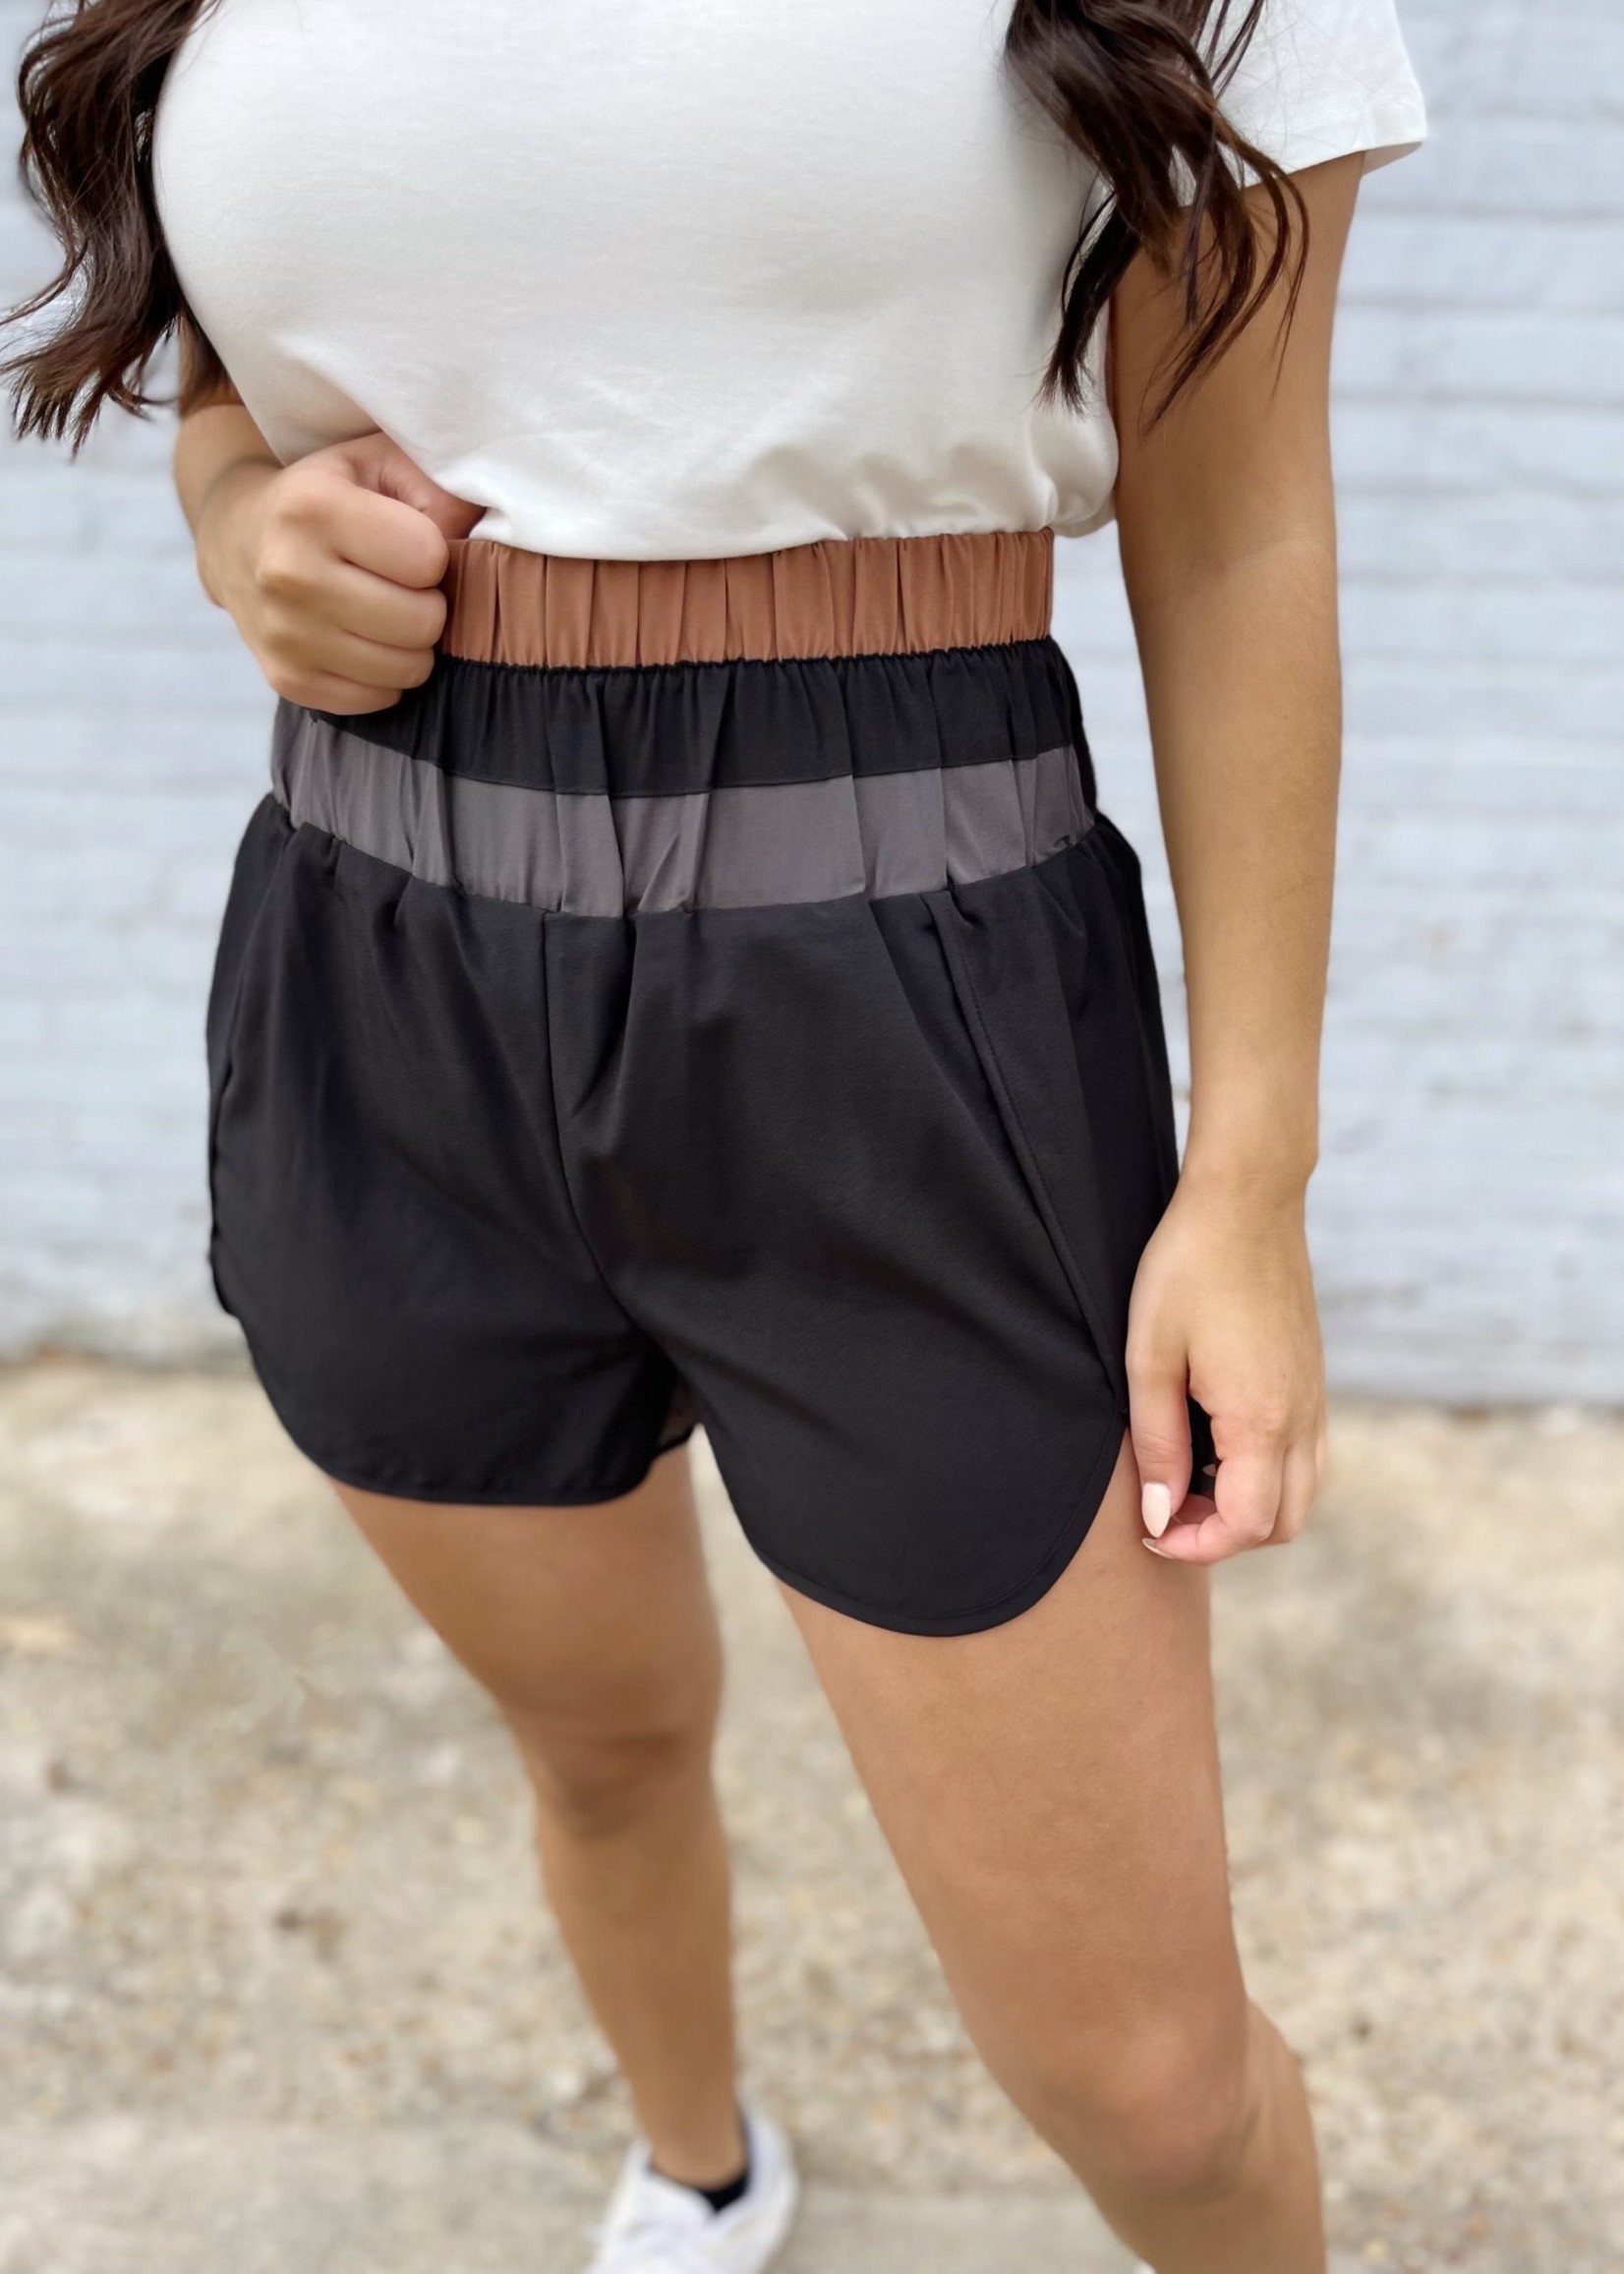 Bloom and Company Black and Brown Colorblock High Waisted Elastic Shorts